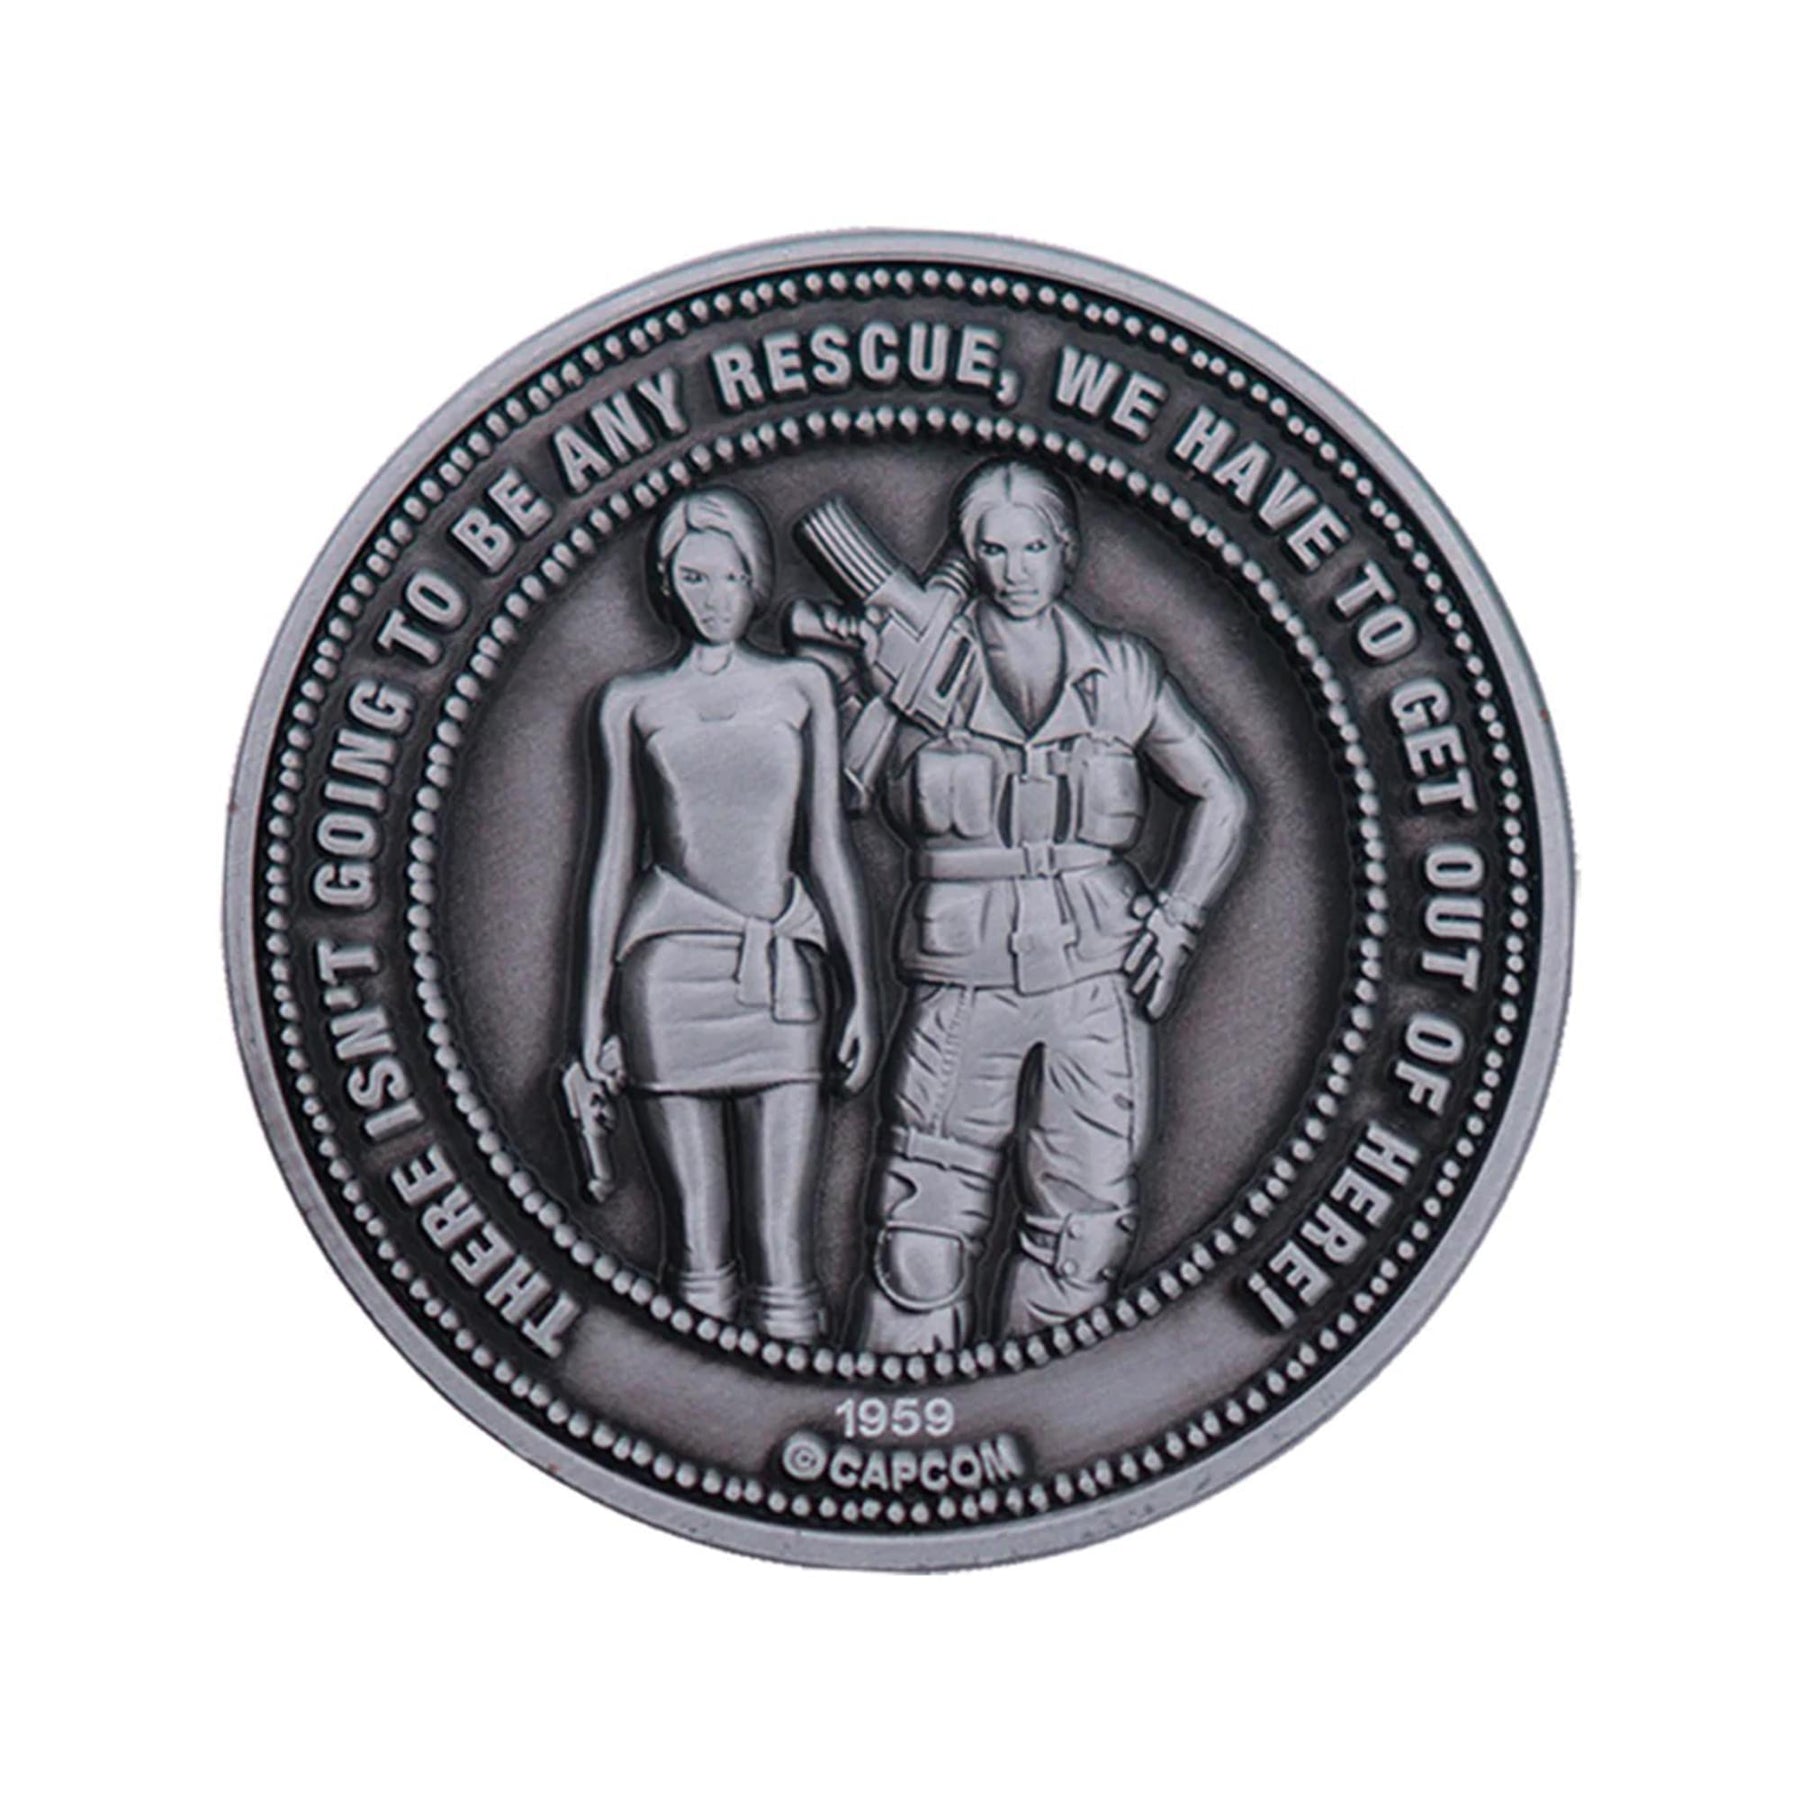 Resident Evil 3 Limited Edition Collectible Coin